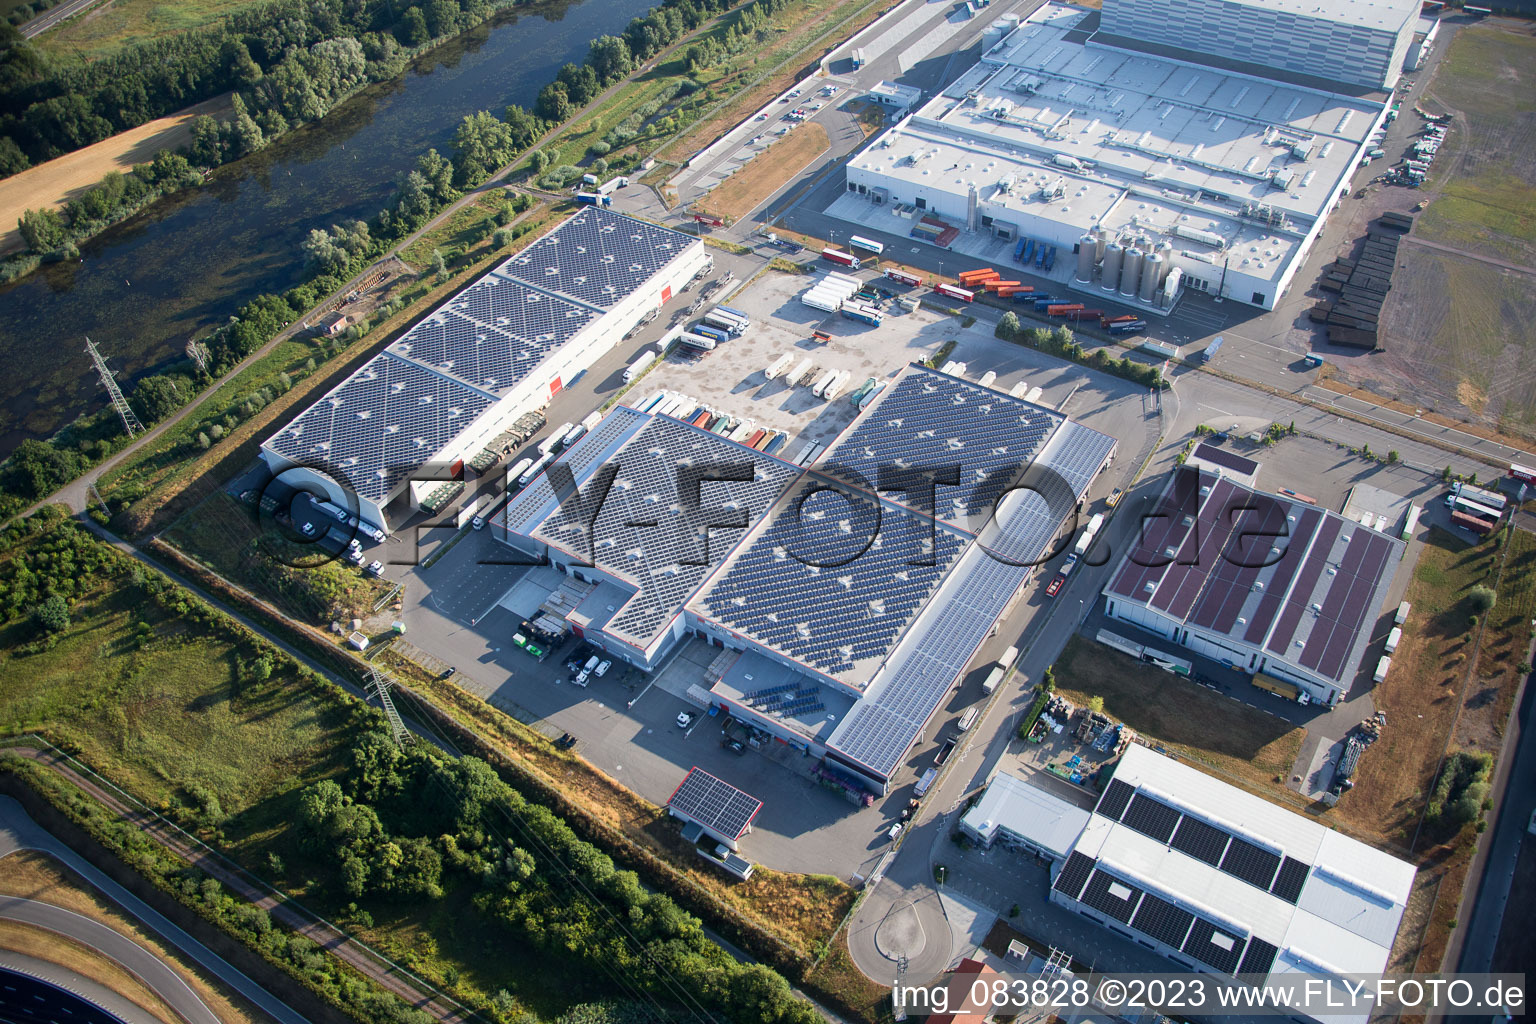 Drone recording of Oberwald industrial area in Wörth am Rhein in the state Rhineland-Palatinate, Germany